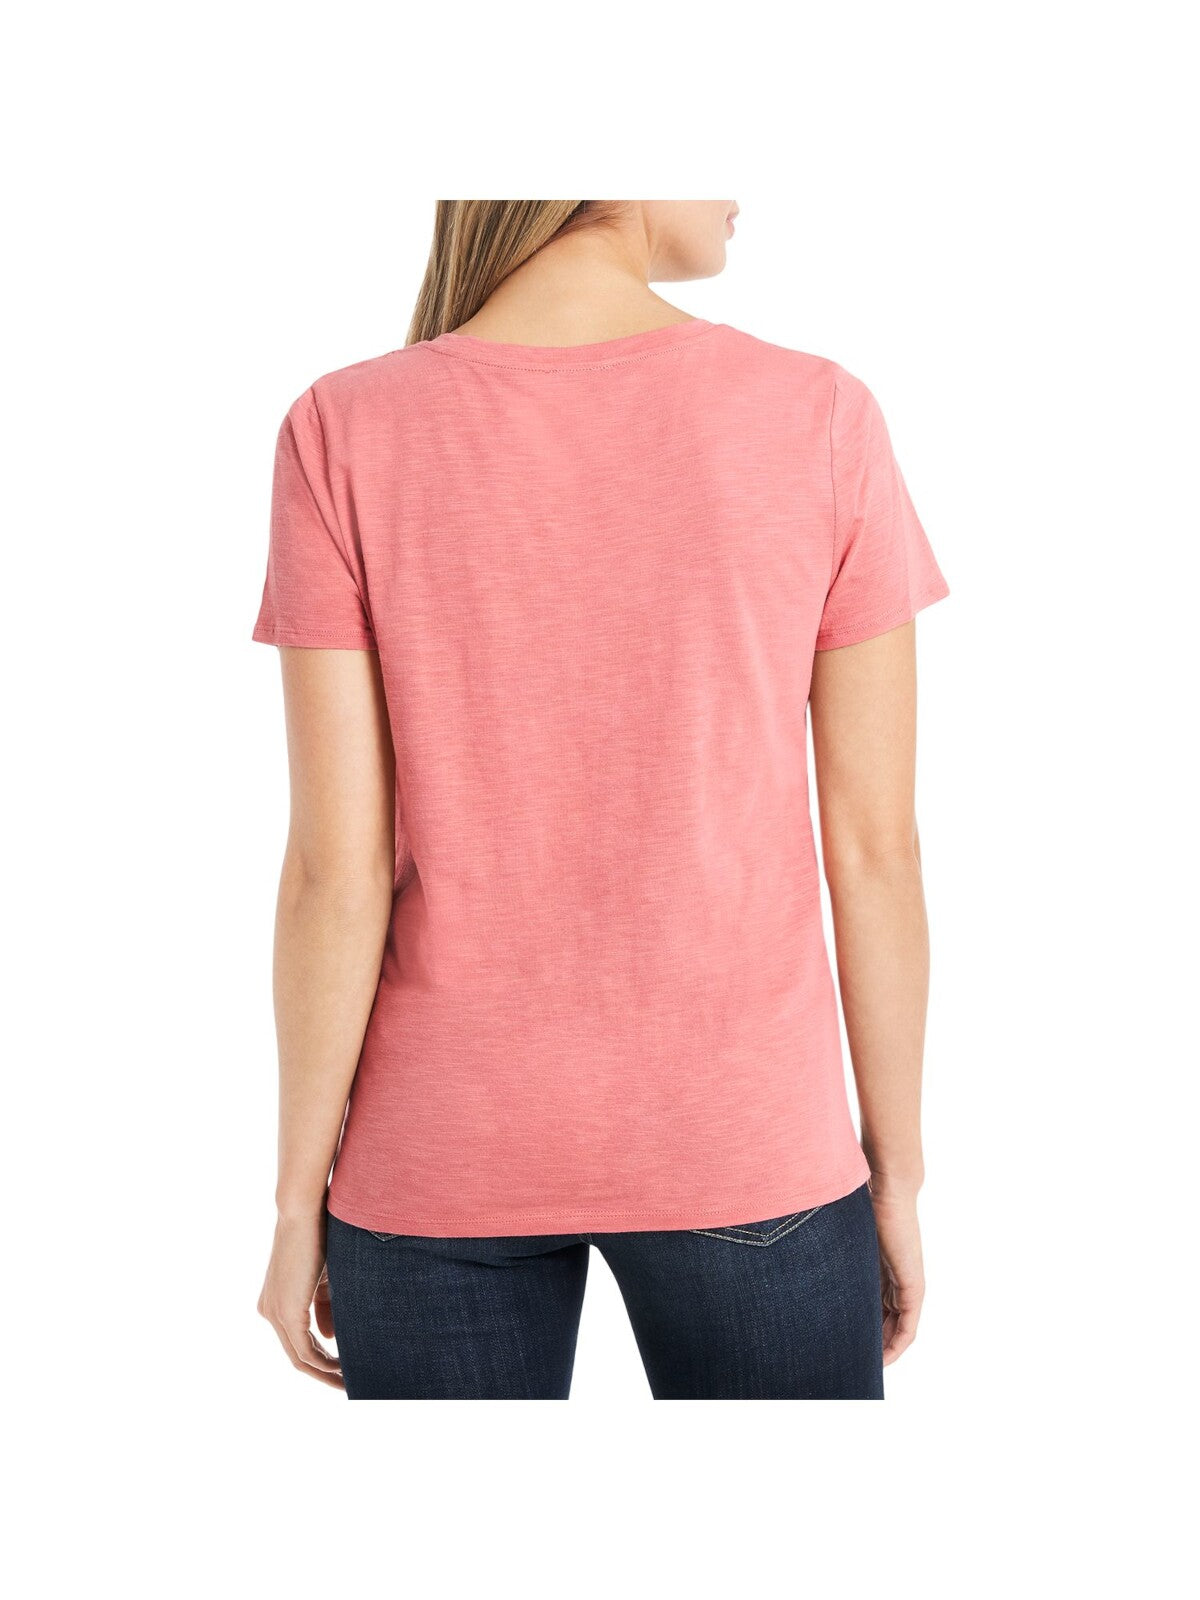 VINCE CAMUTO Womens Coral Short Sleeve Scoop Neck Top XXS